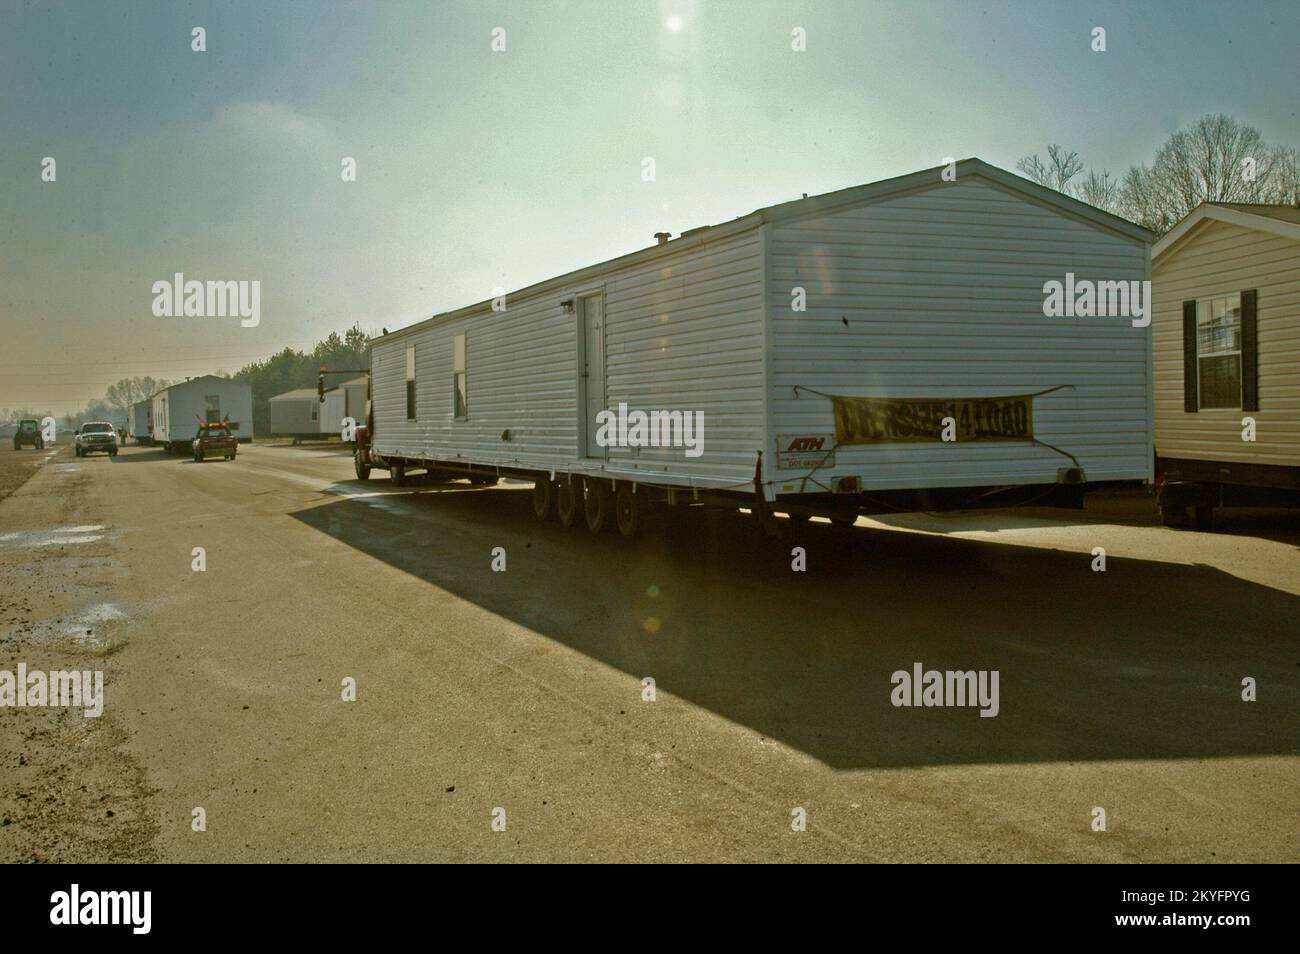 Hurricane Katrina, HOPE, AR, March 10, 2007 -- Several more of the 23 mobile homes that are heading to Dumas, AR to serve as emergency housing for those recently affected by tornadoes, begin their four hour journey across the state. FEMA Stock Photo